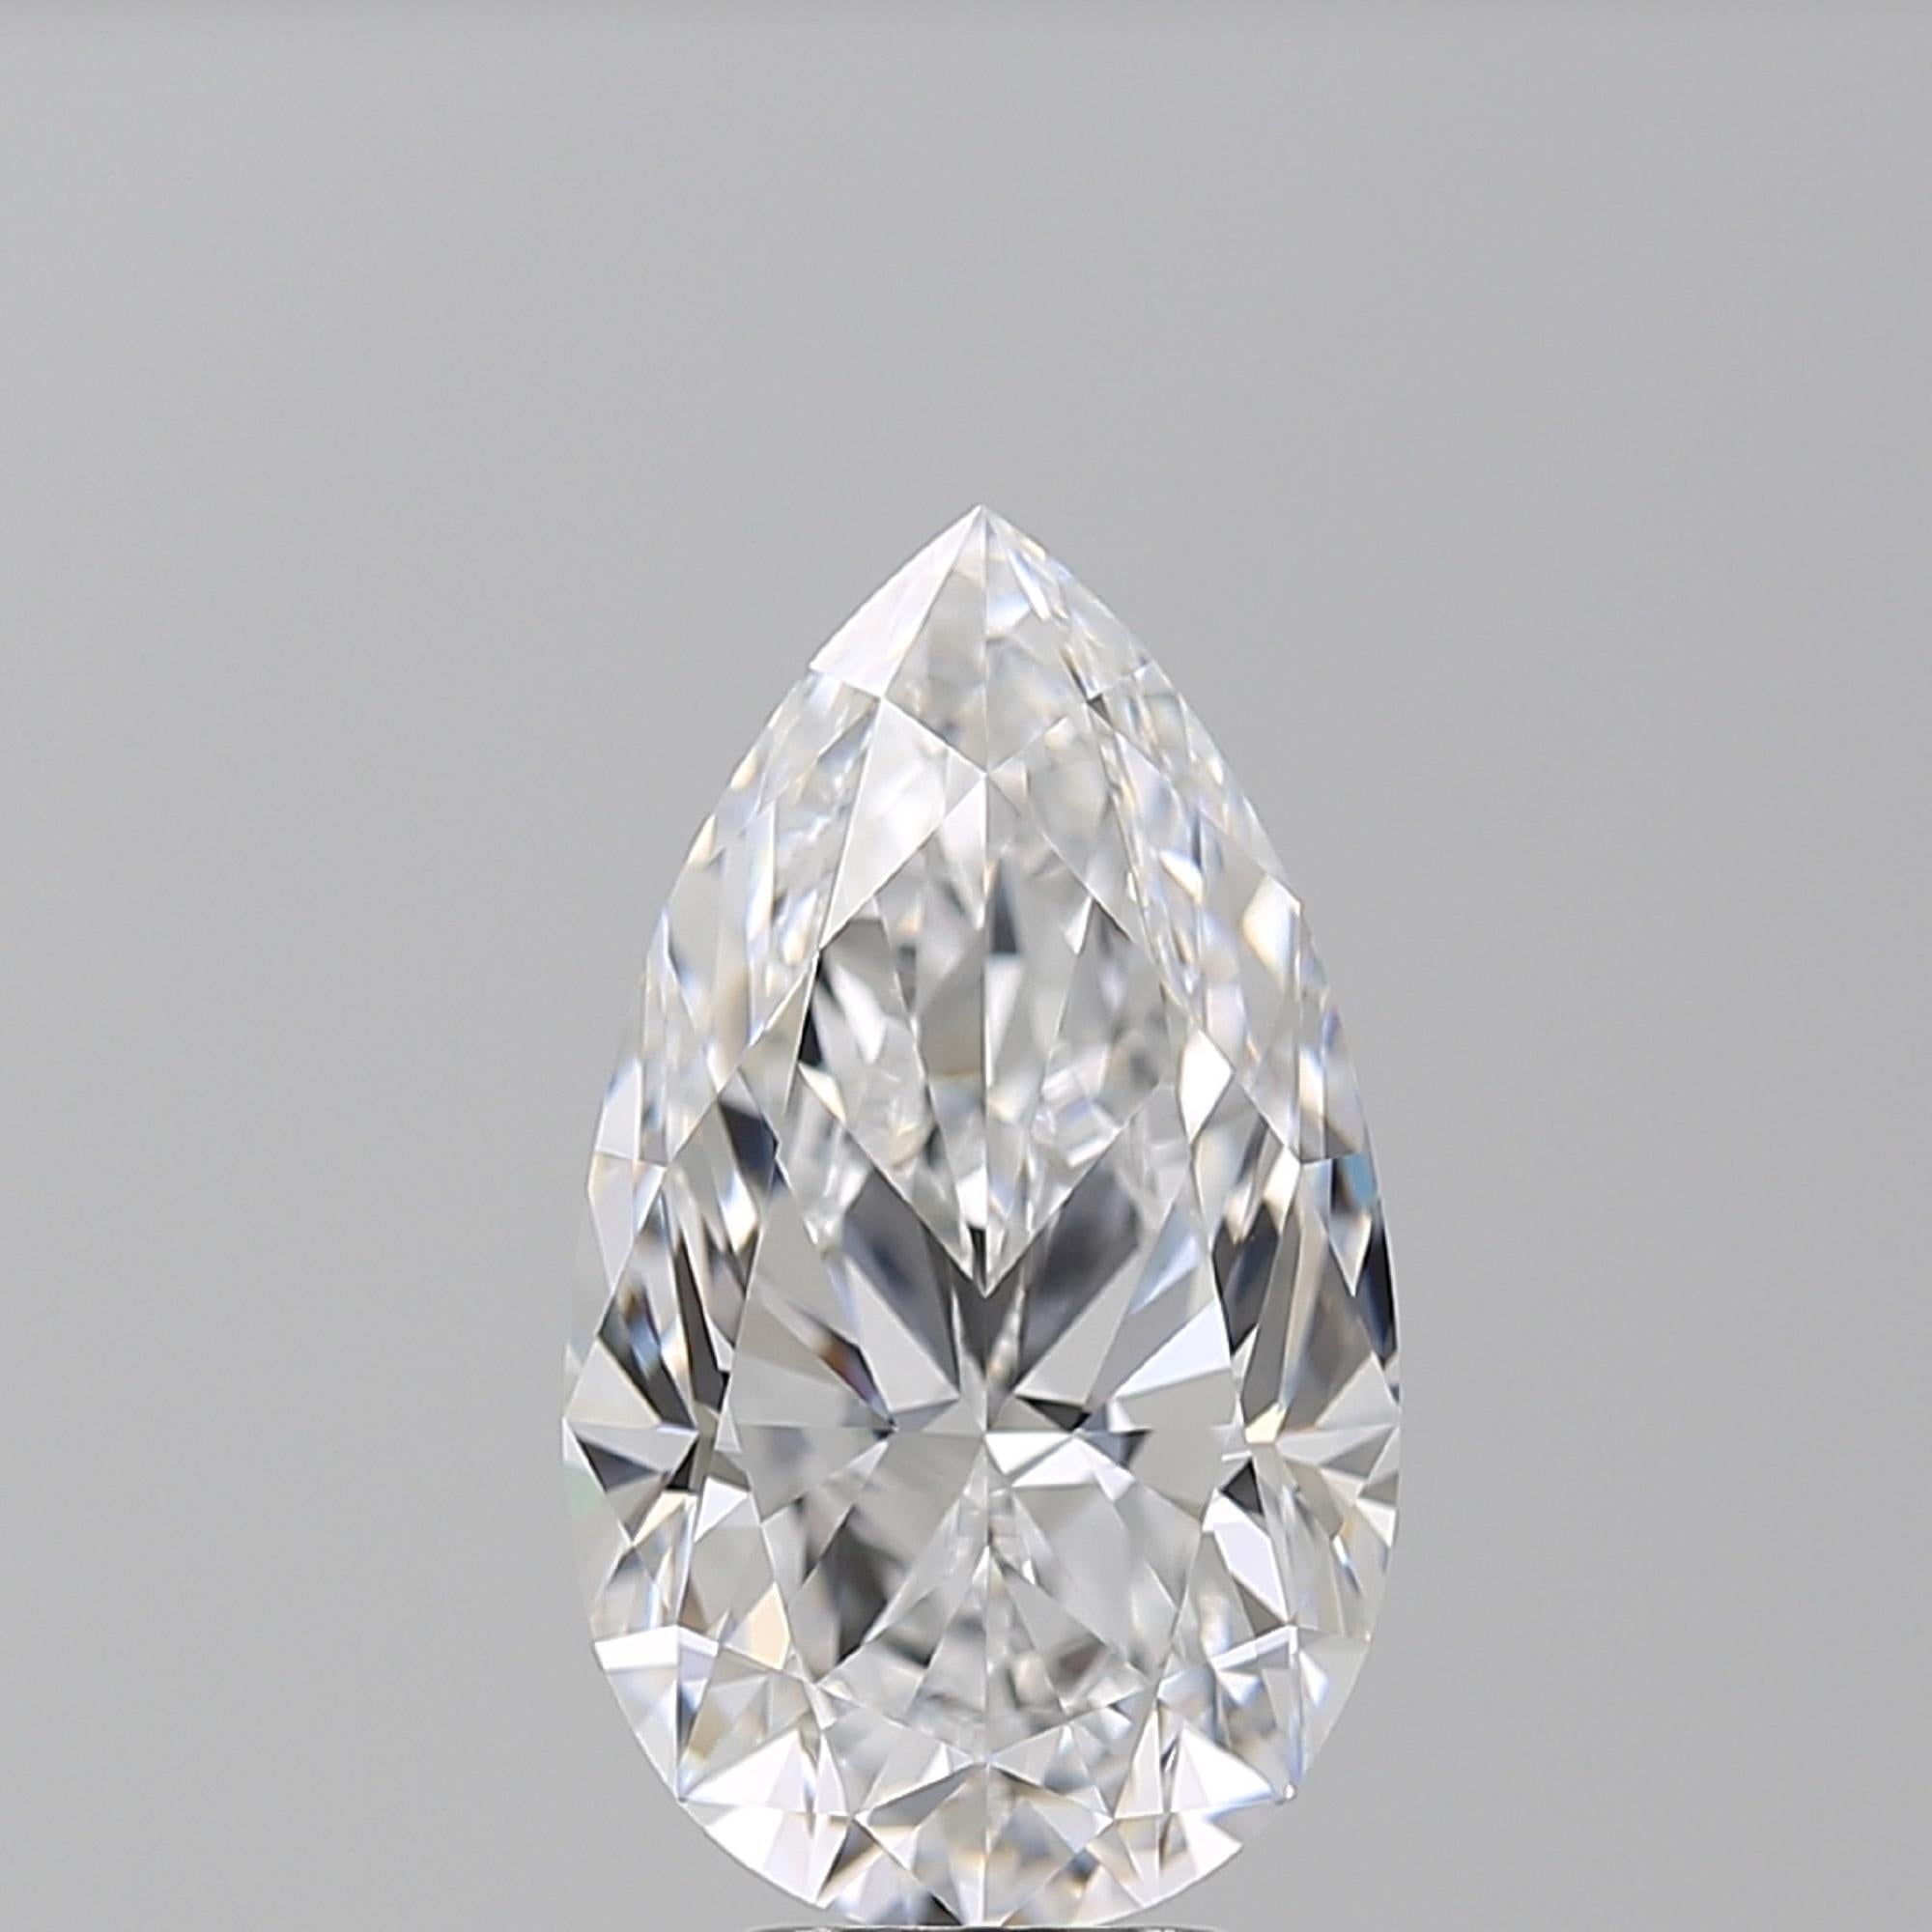 EXCEPTIONAL FLAWLESS TYPE 2A GIA Certified 5.41 Carat Pear Cut Diamond Ring 
NONE FLUORESCENCE
EXCELLENT SYMMETRY
EXCELLENT POLISH
